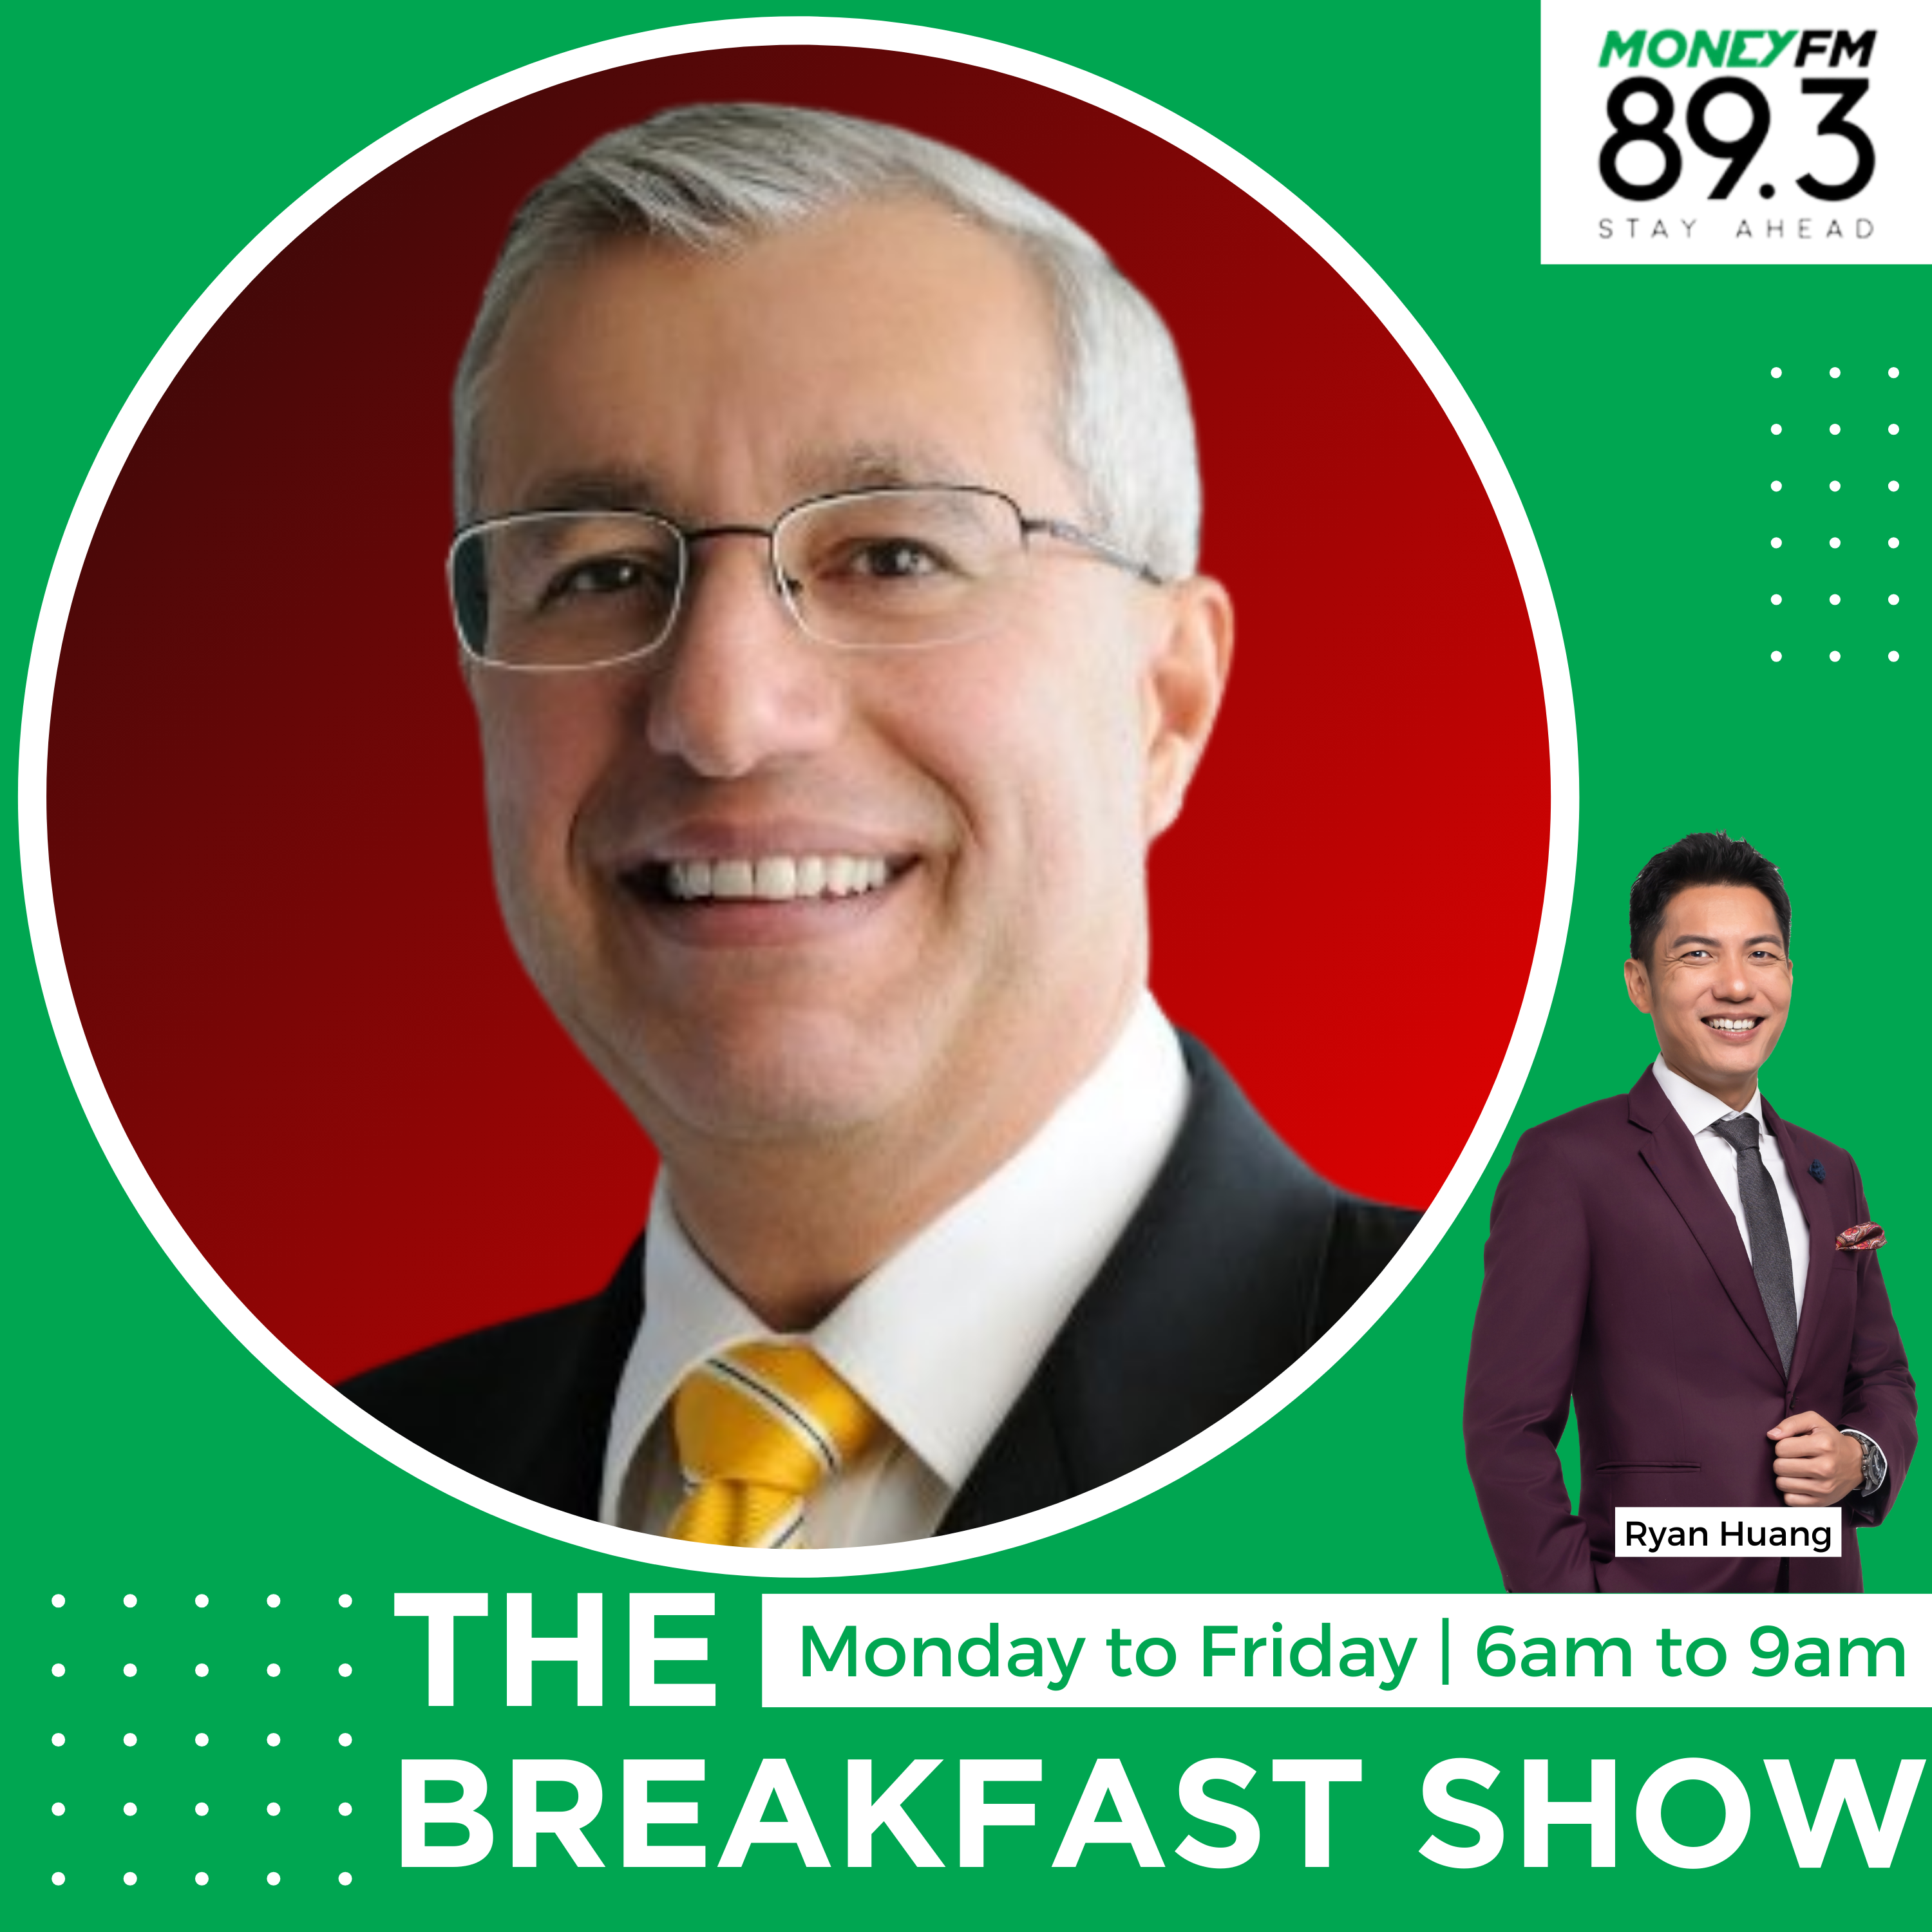 Breakfast Exclusive: Ontario announces plans to open a new office in Singapore. How big are the business opportunities?